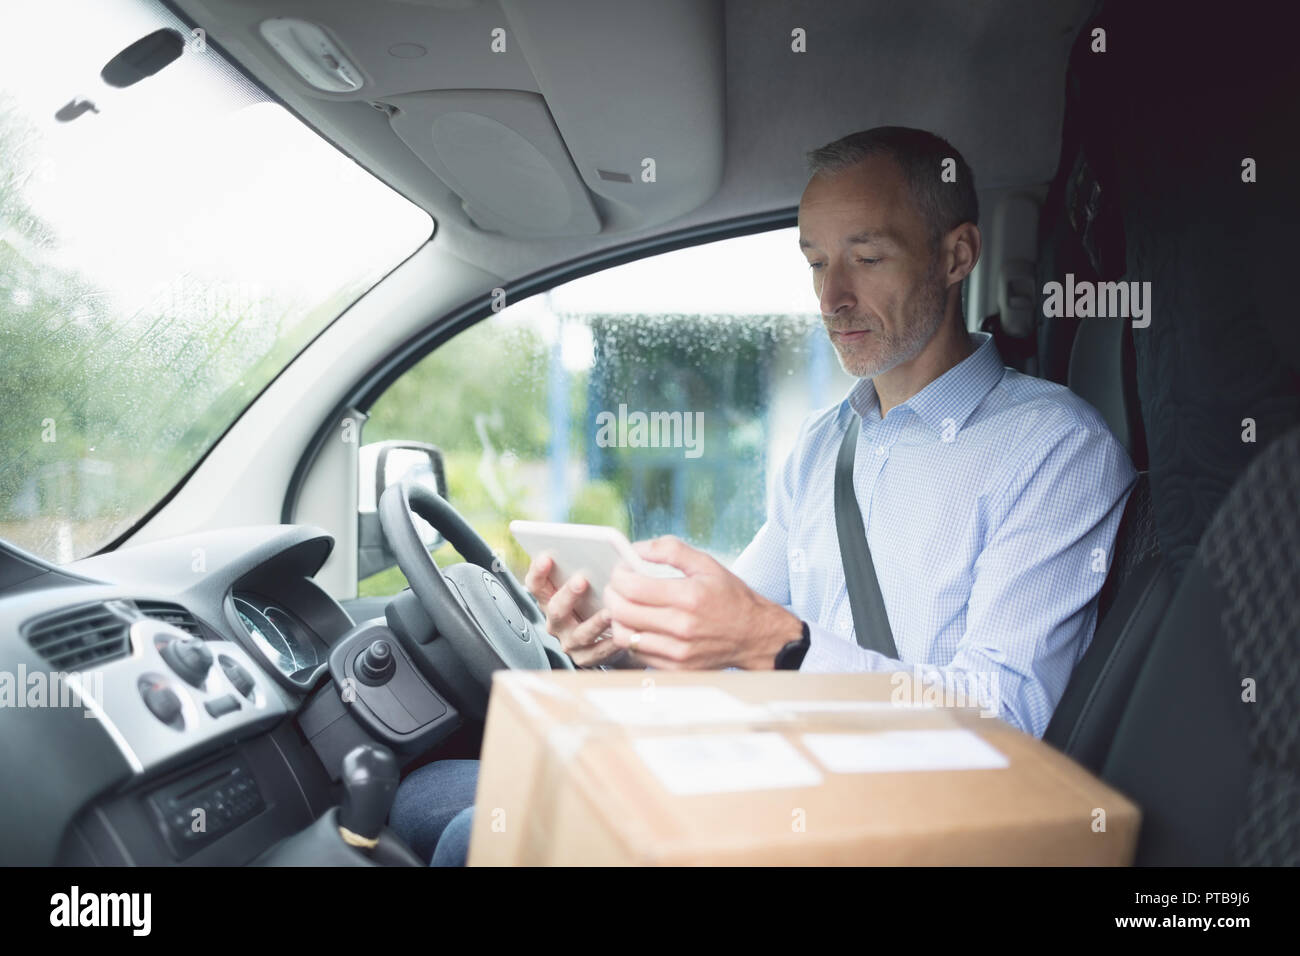 Delivery man using digital tablet in delivery van Stock Photo